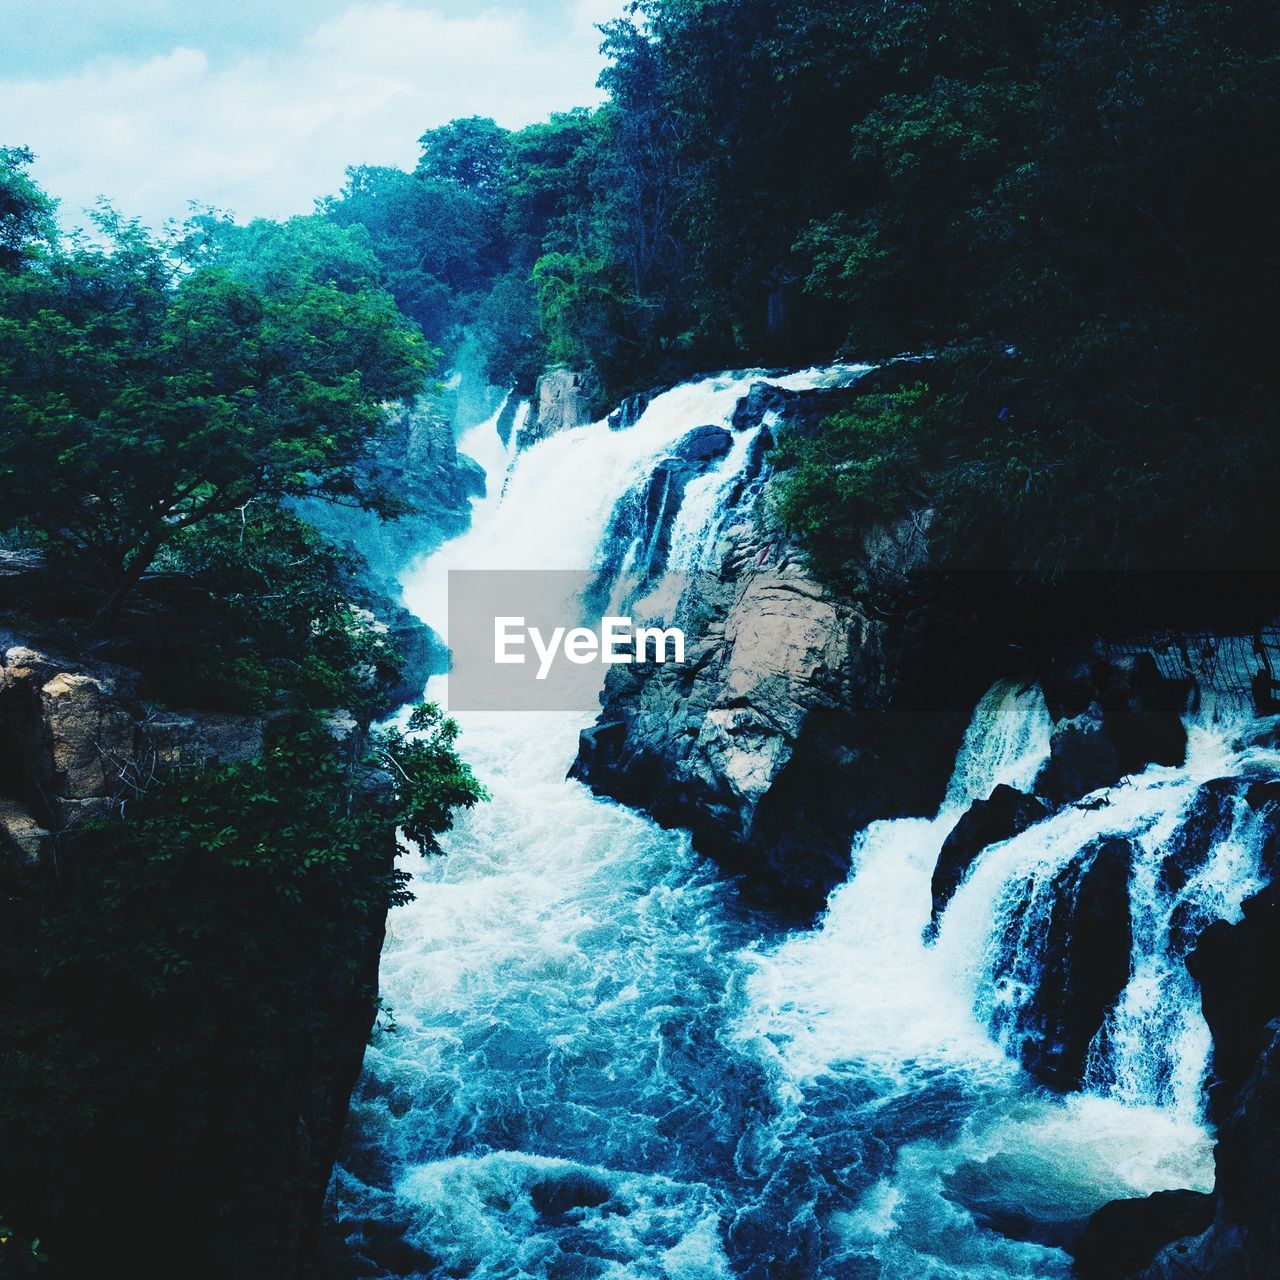 VIEW OF WATERFALL IN FOREST